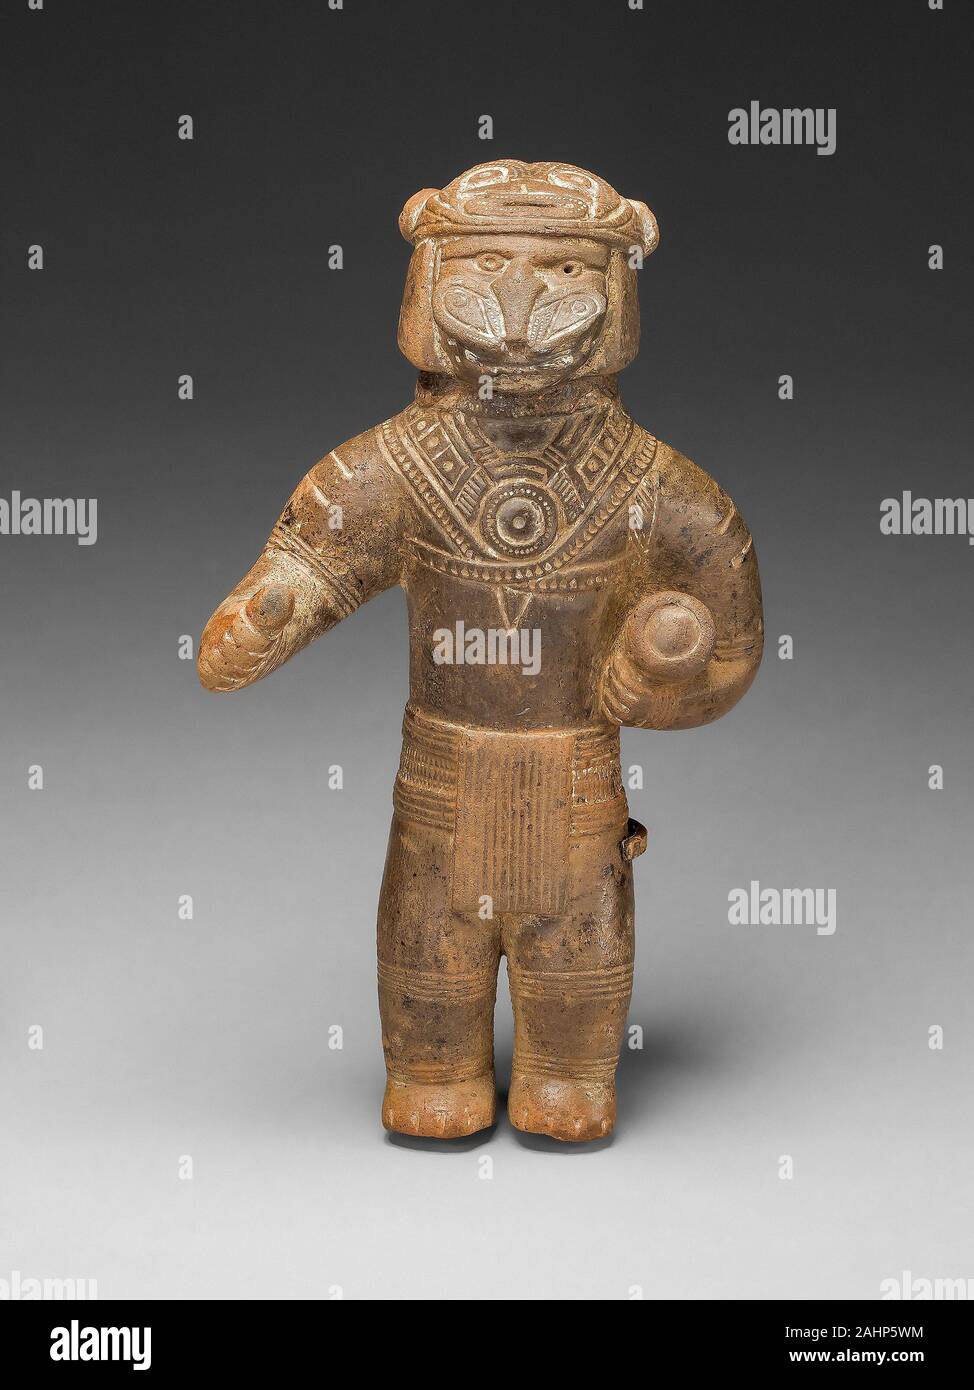 Tairona. Masked Figurine Holding a Drum, Possibly a Ocarina (Whistle). 1200–1400. Colombia. Ceramic and pigment To this day in Tairona communities, masked individuals dance, personifying the deified forces and phenomena of nature. This act associates the annual round of social and economic activities with the natural world’s cycle of death, fertility, and renewal. Stock Photo